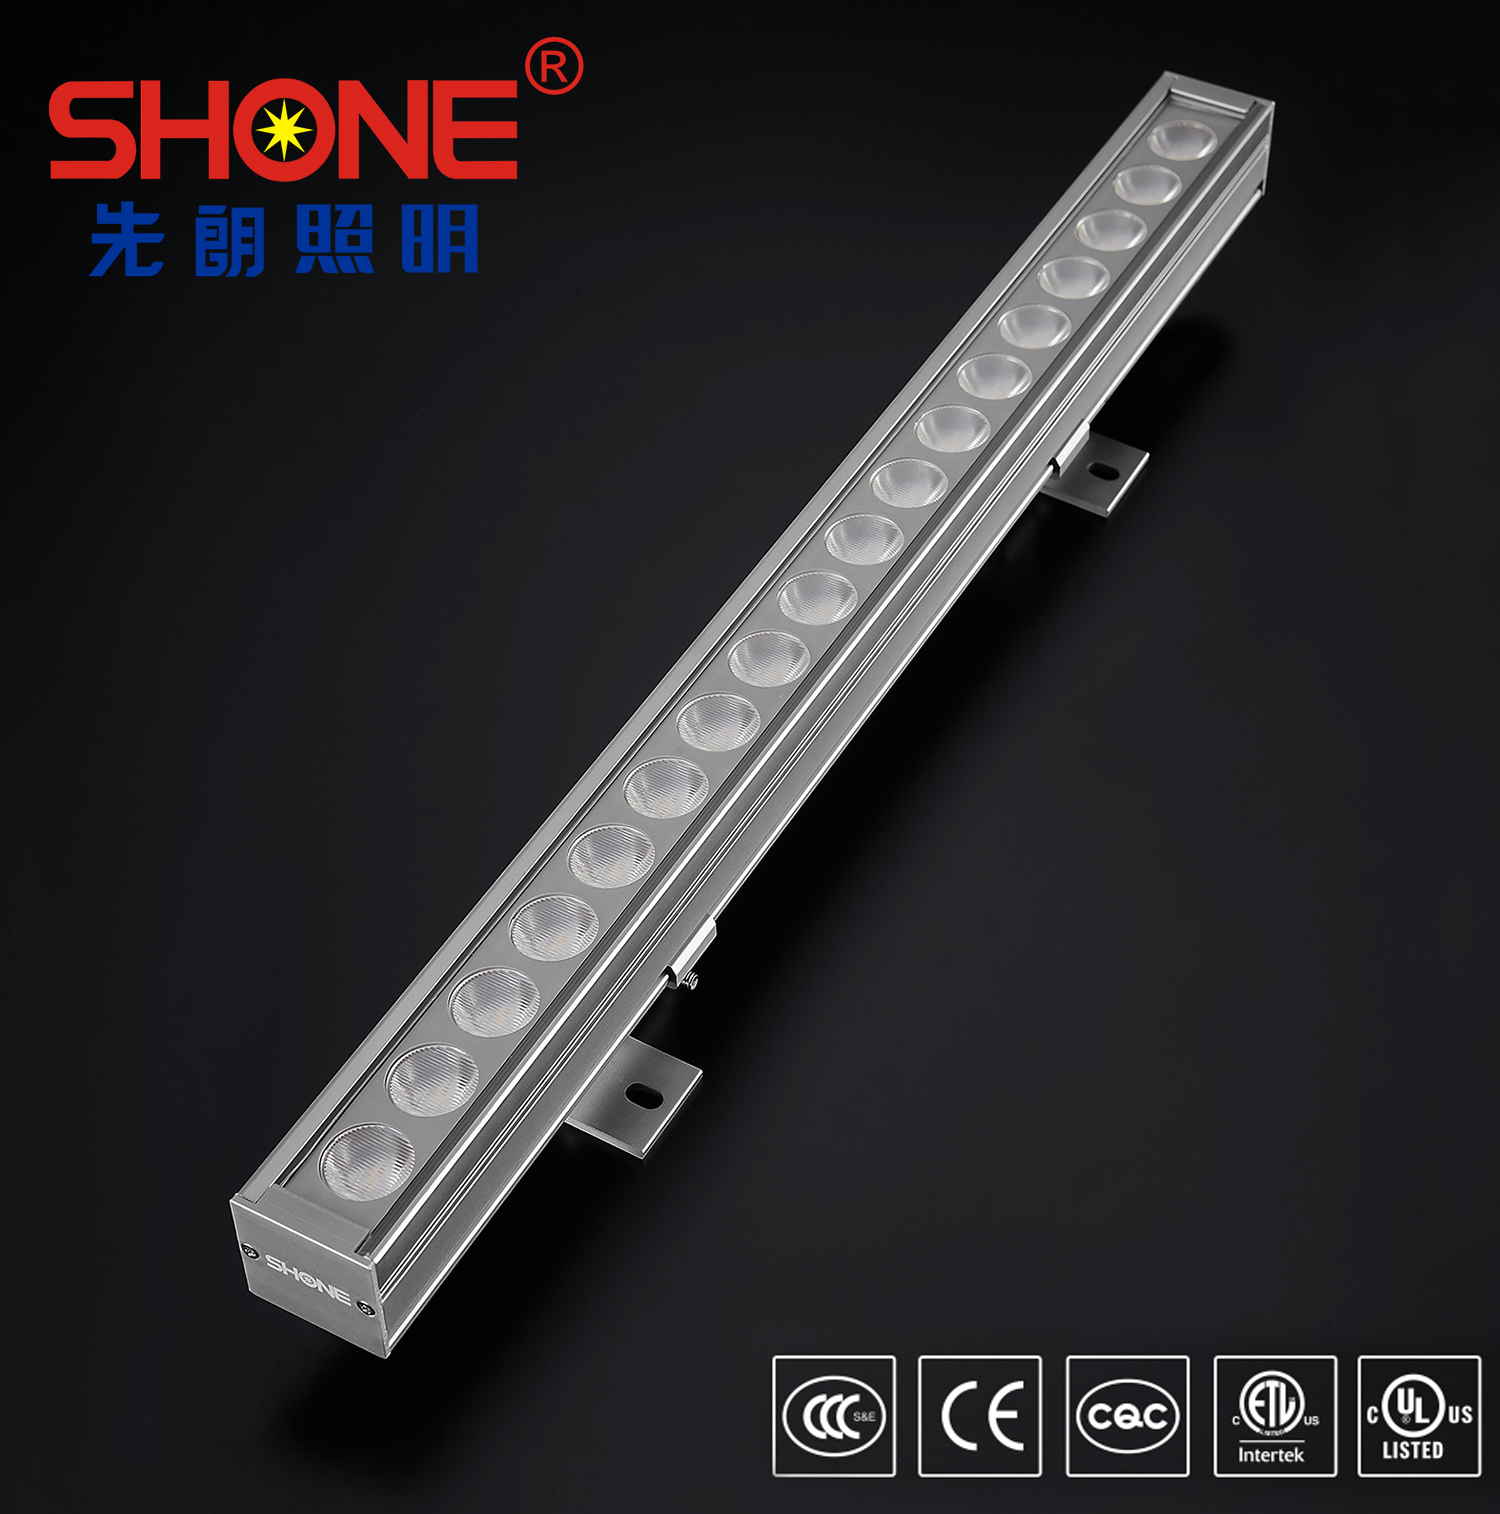 Shone Lighting 38x36 LED Linear Light Wall Washer with CE ETL Certificate IP66 for Outdoor Lighting